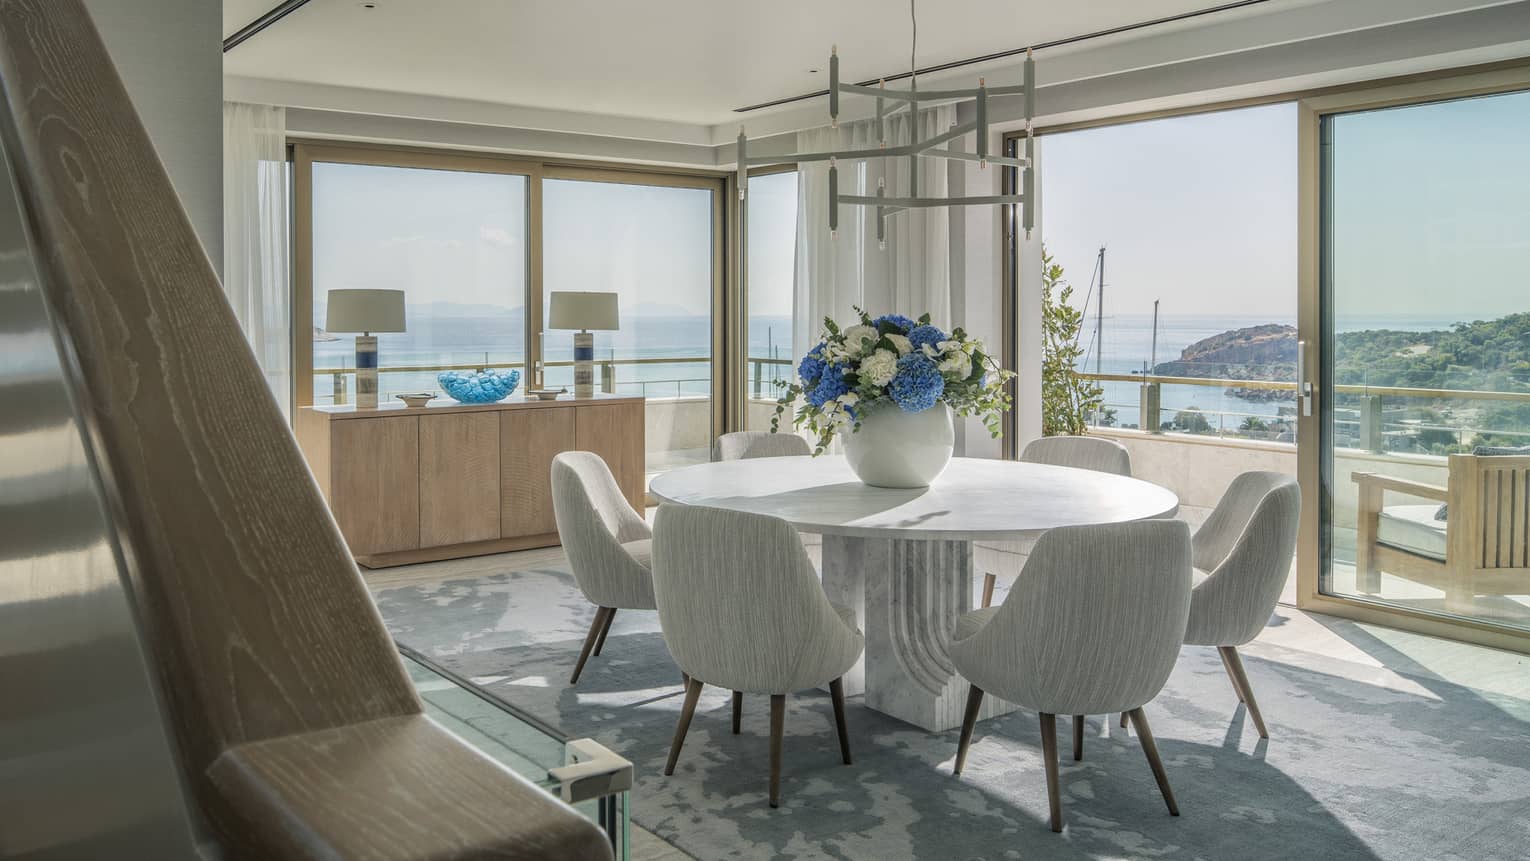 Arion Riviera Suite dining area with round table, white bucket chairs, panoramic ocean views